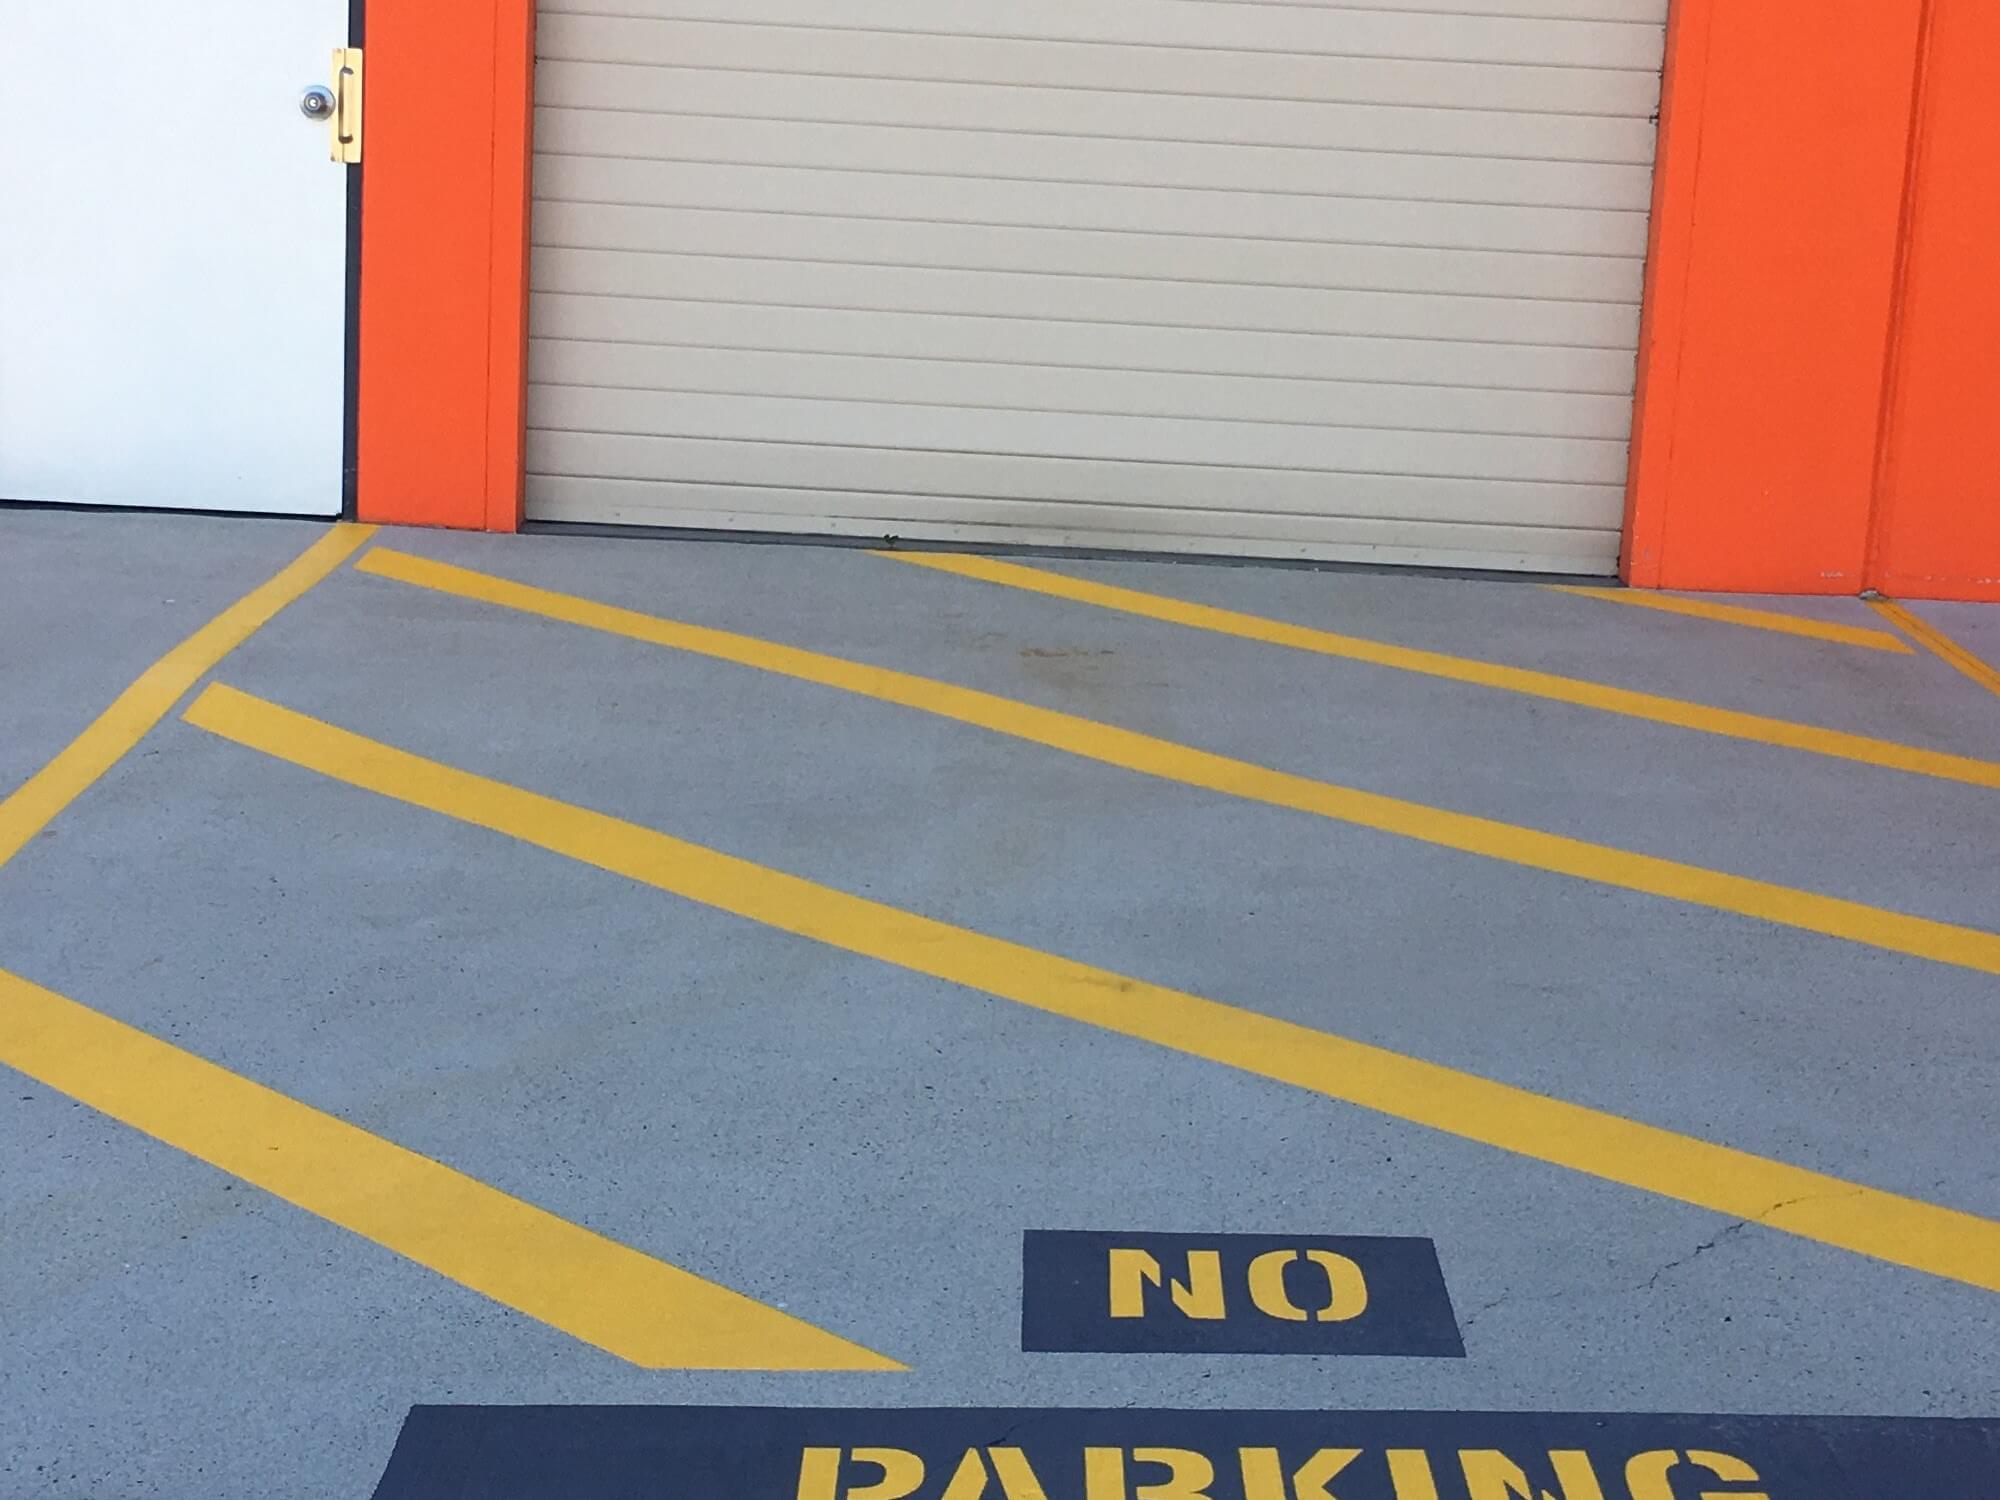 A recently cleaned no parking area